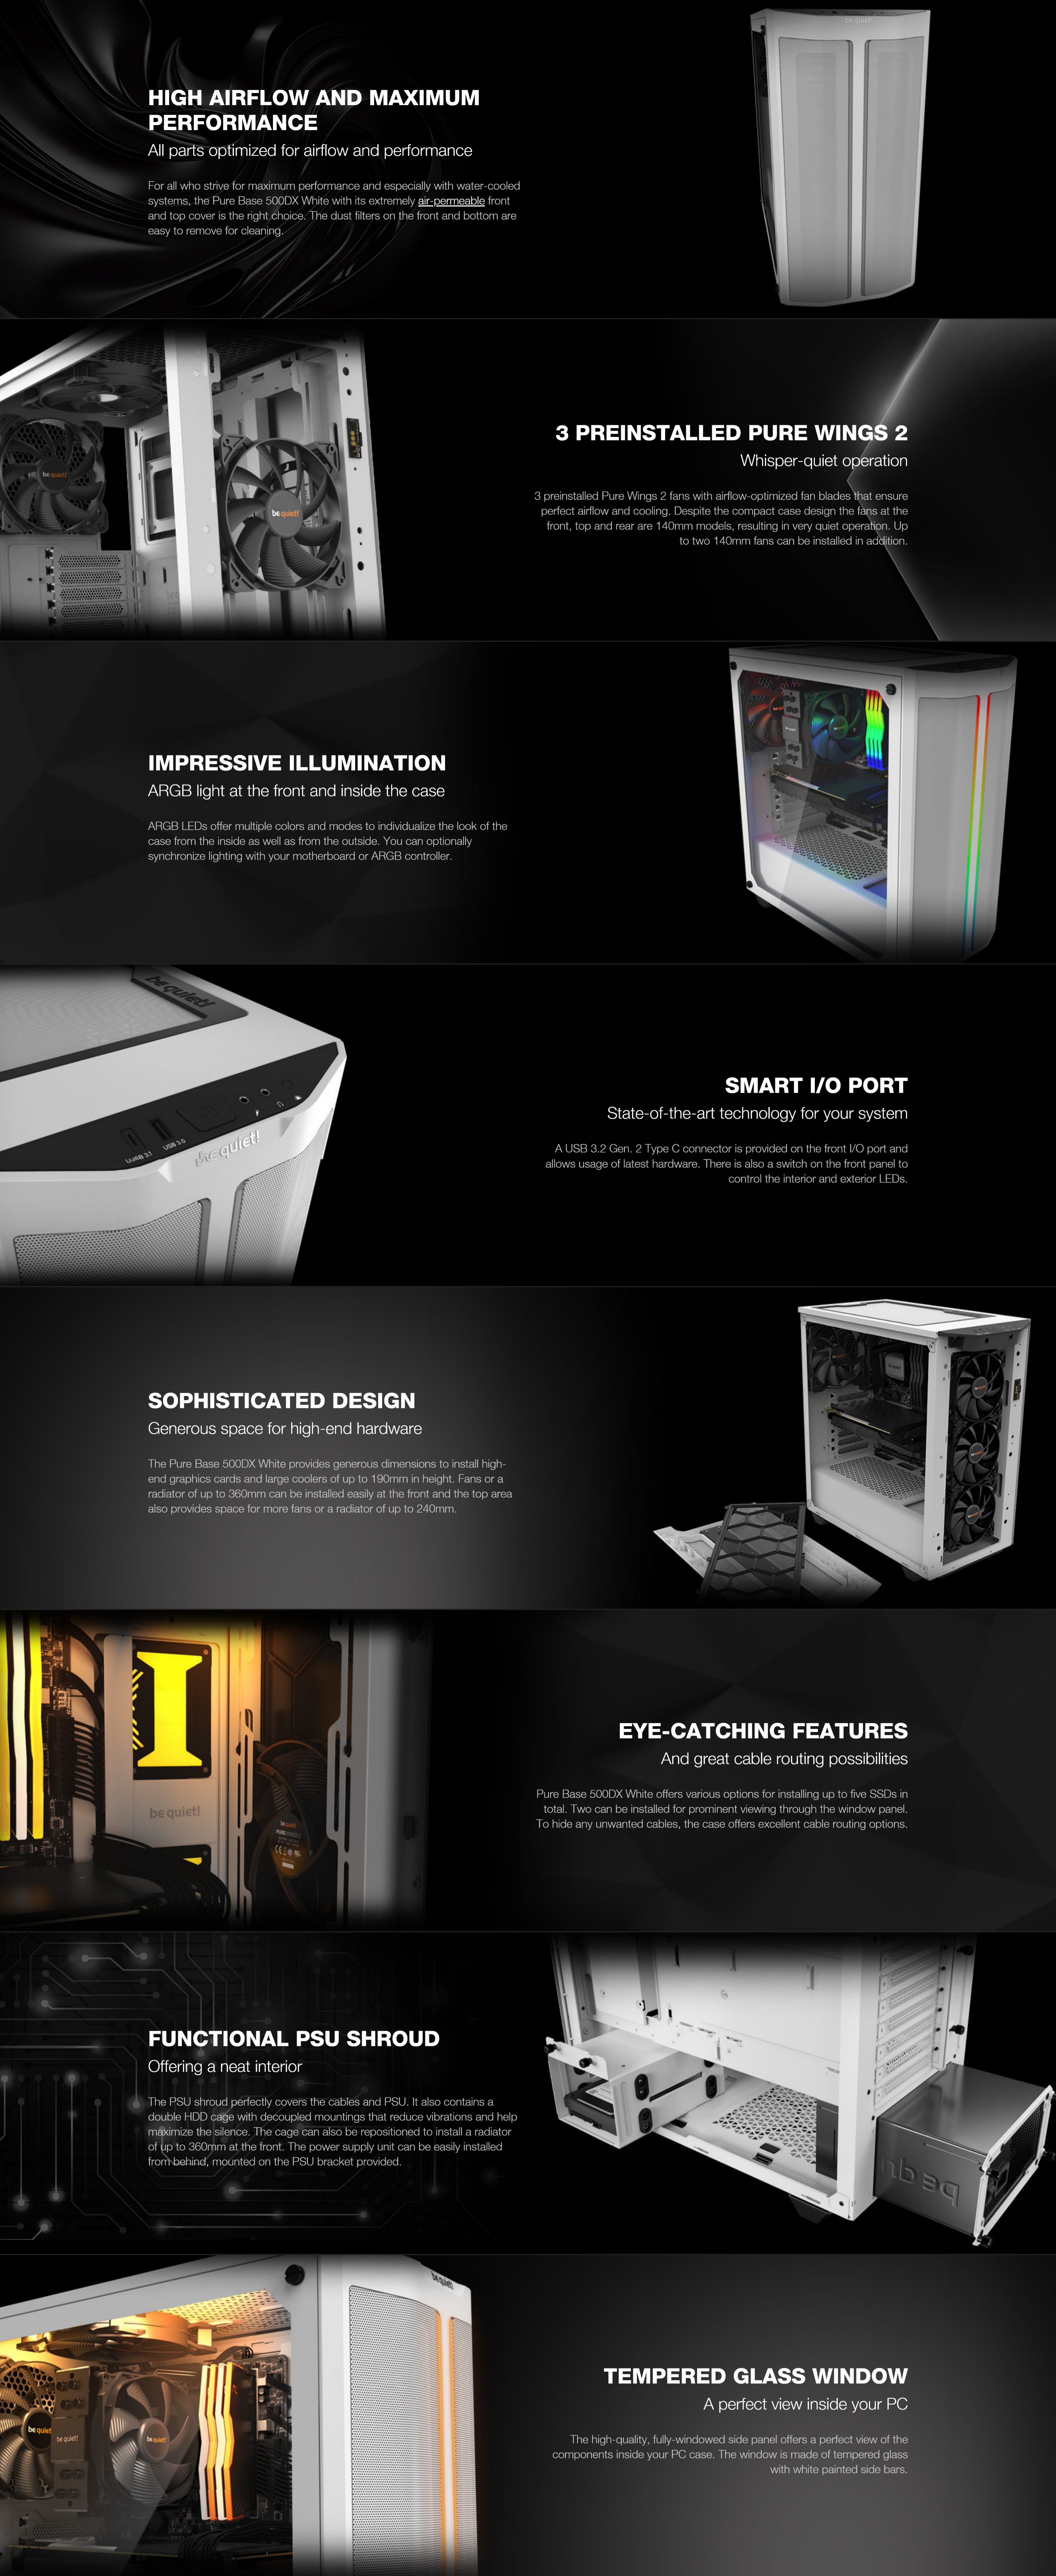 A large marketing image providing additional information about the product be quiet! PURE BASE 500DX TG Mid Tower Case - White - Additional alt info not provided